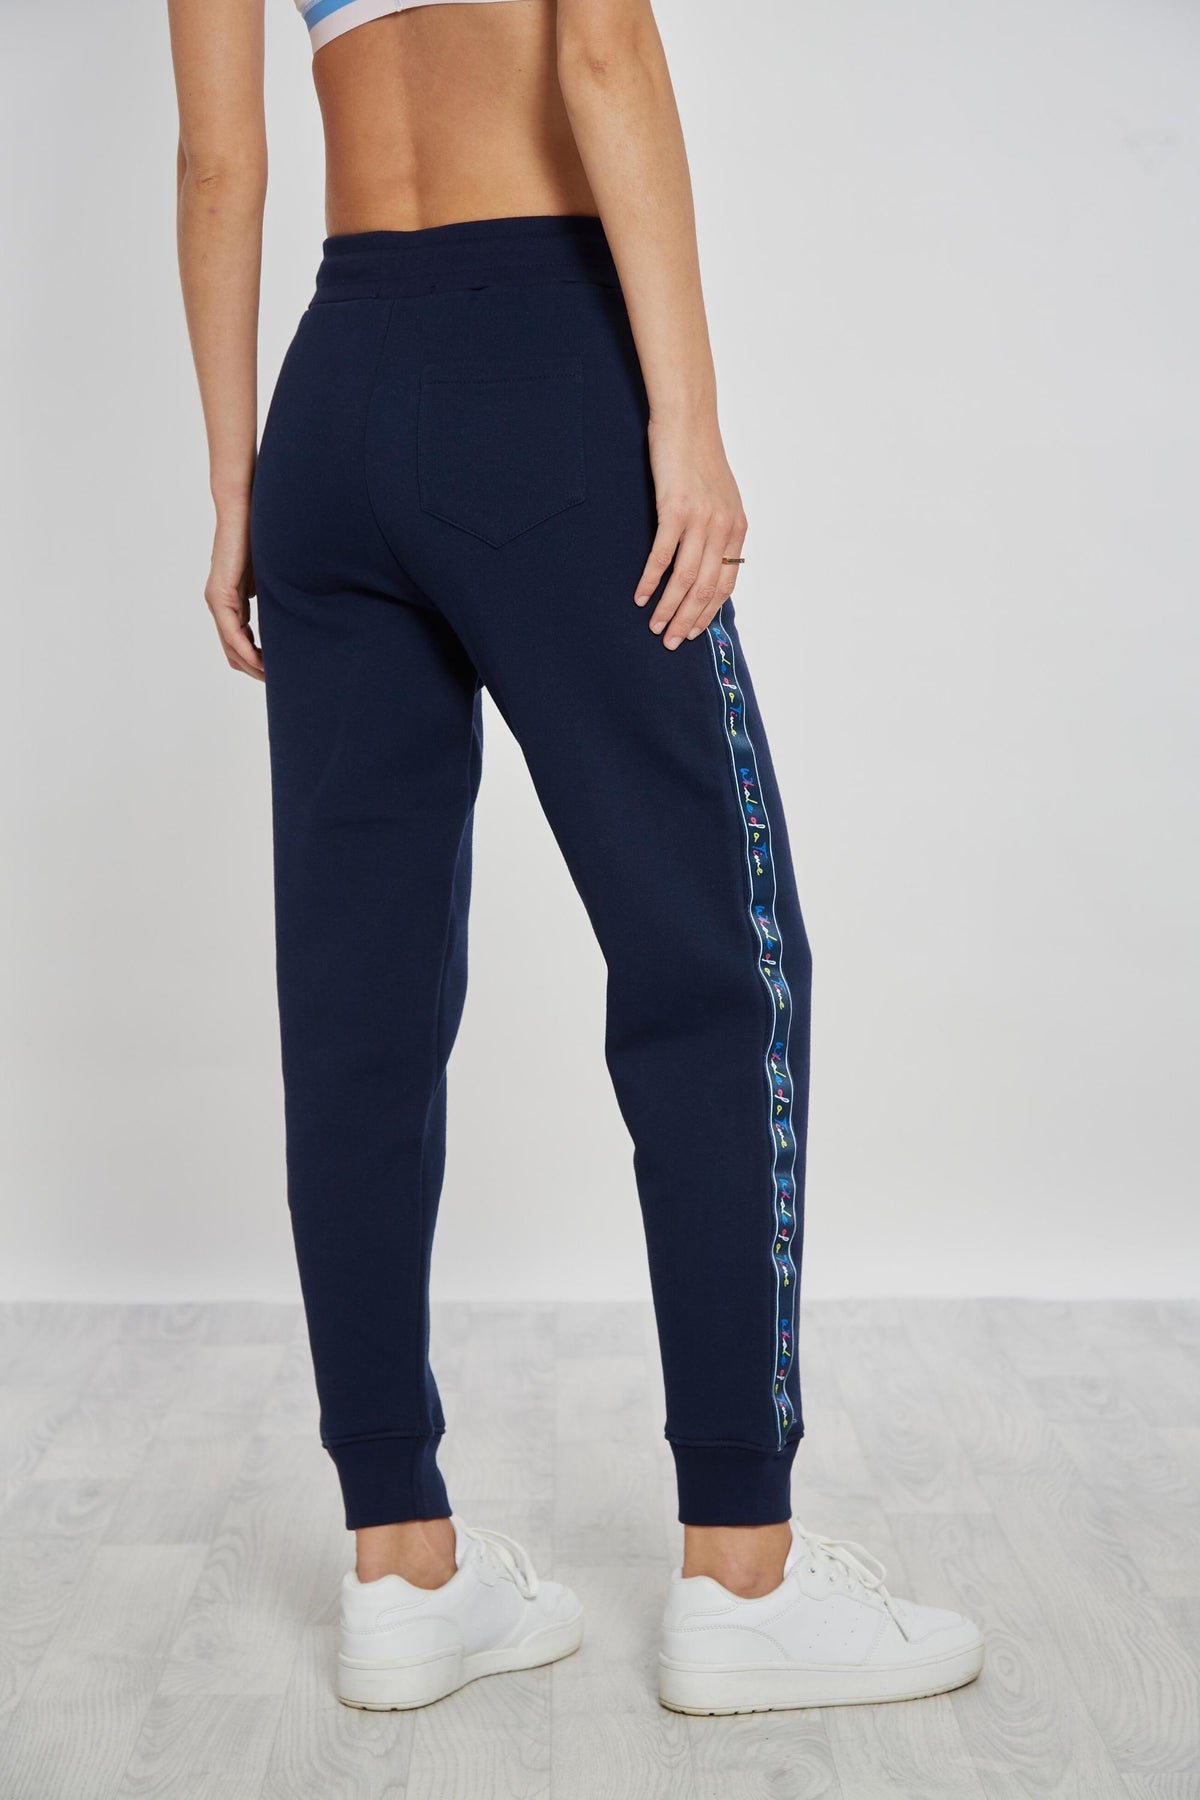 Basics Unisex Joggers - Navy - Whale Of A Time Clothing